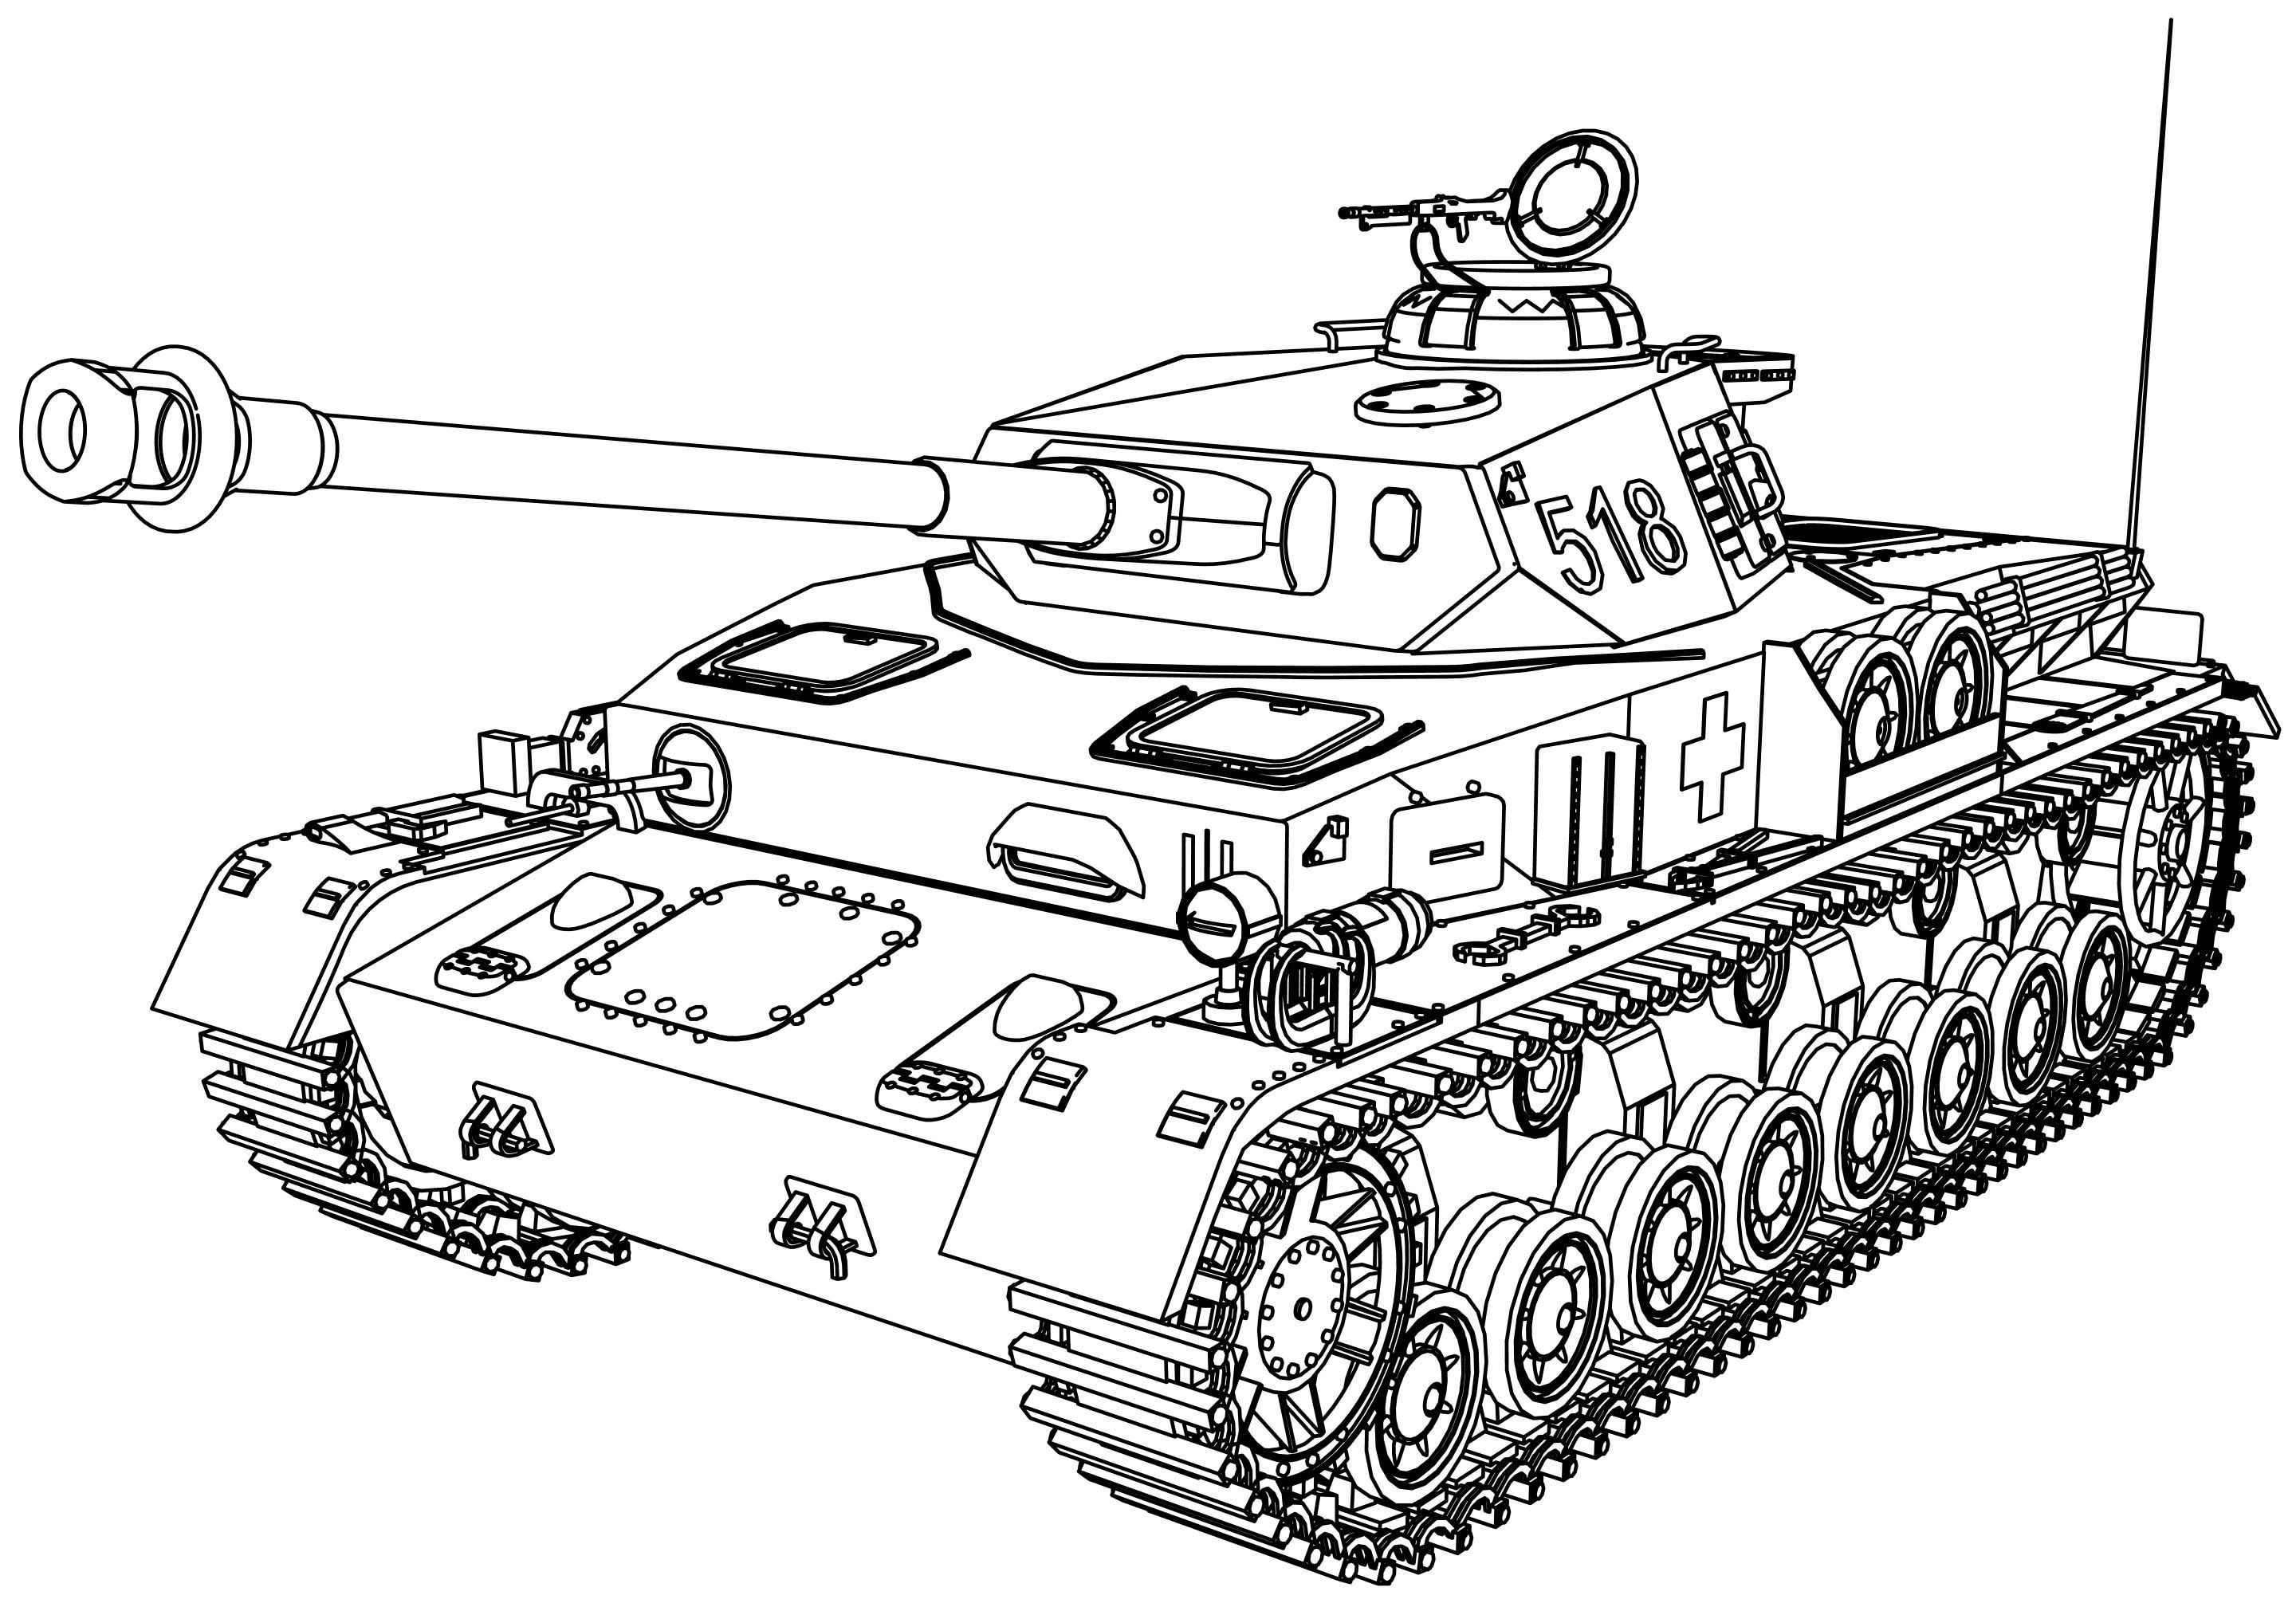 Printable Army Tank Coloring Pages Pdf - Army Tank Coloring Pages Printable